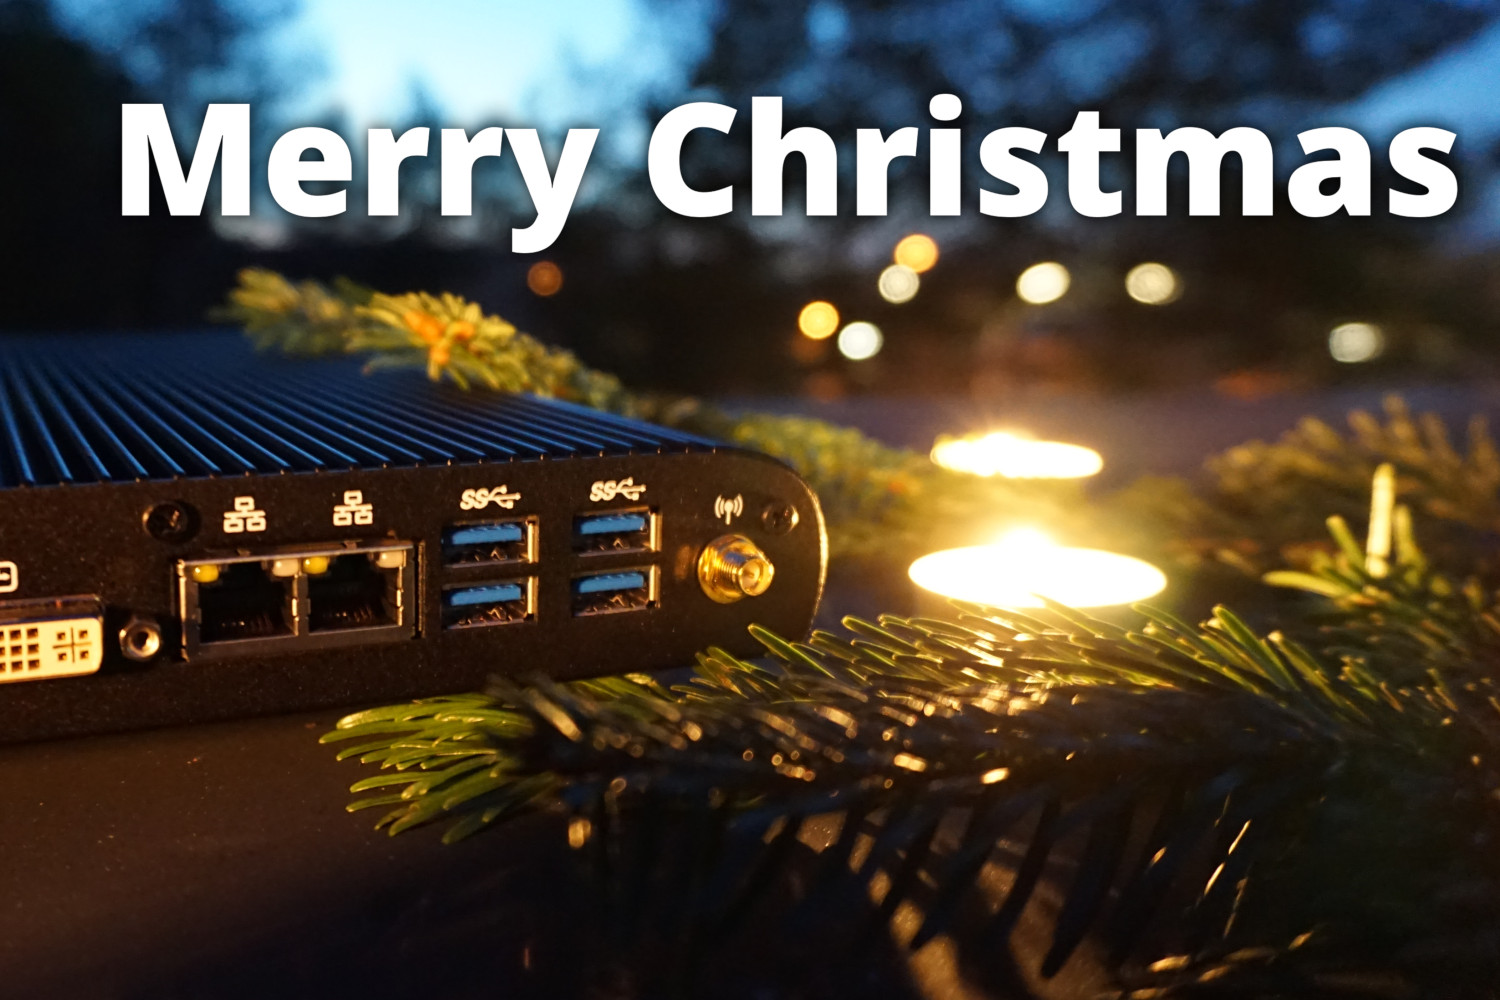 spo-comm wishes you a Merry Christmas and a successful 2016